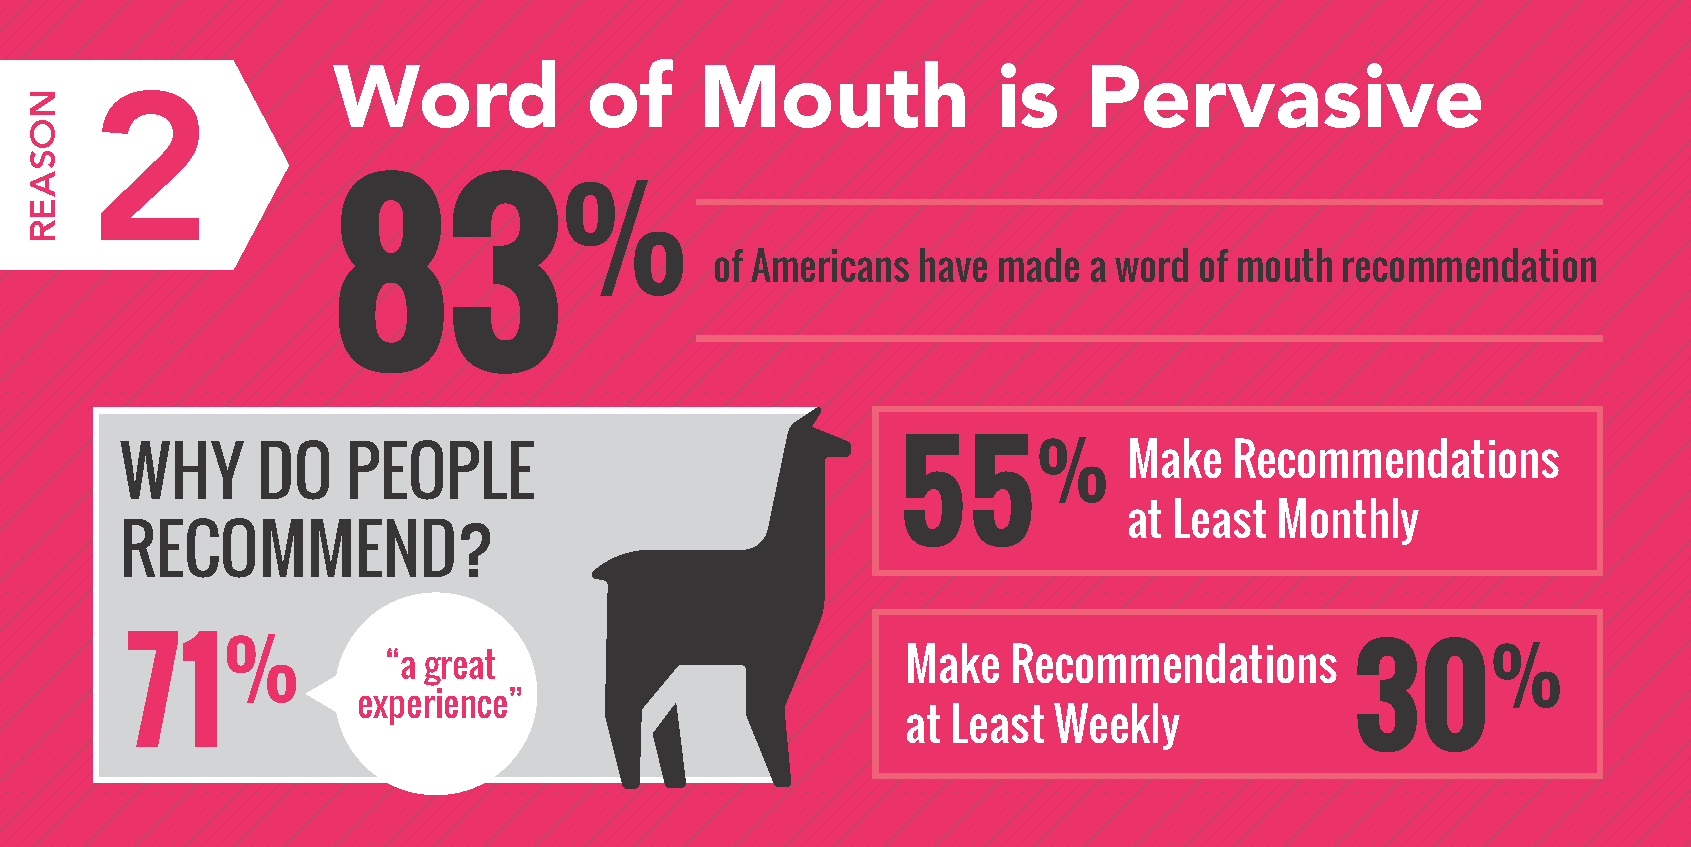 statistics: the importance of word of mouth recommendations